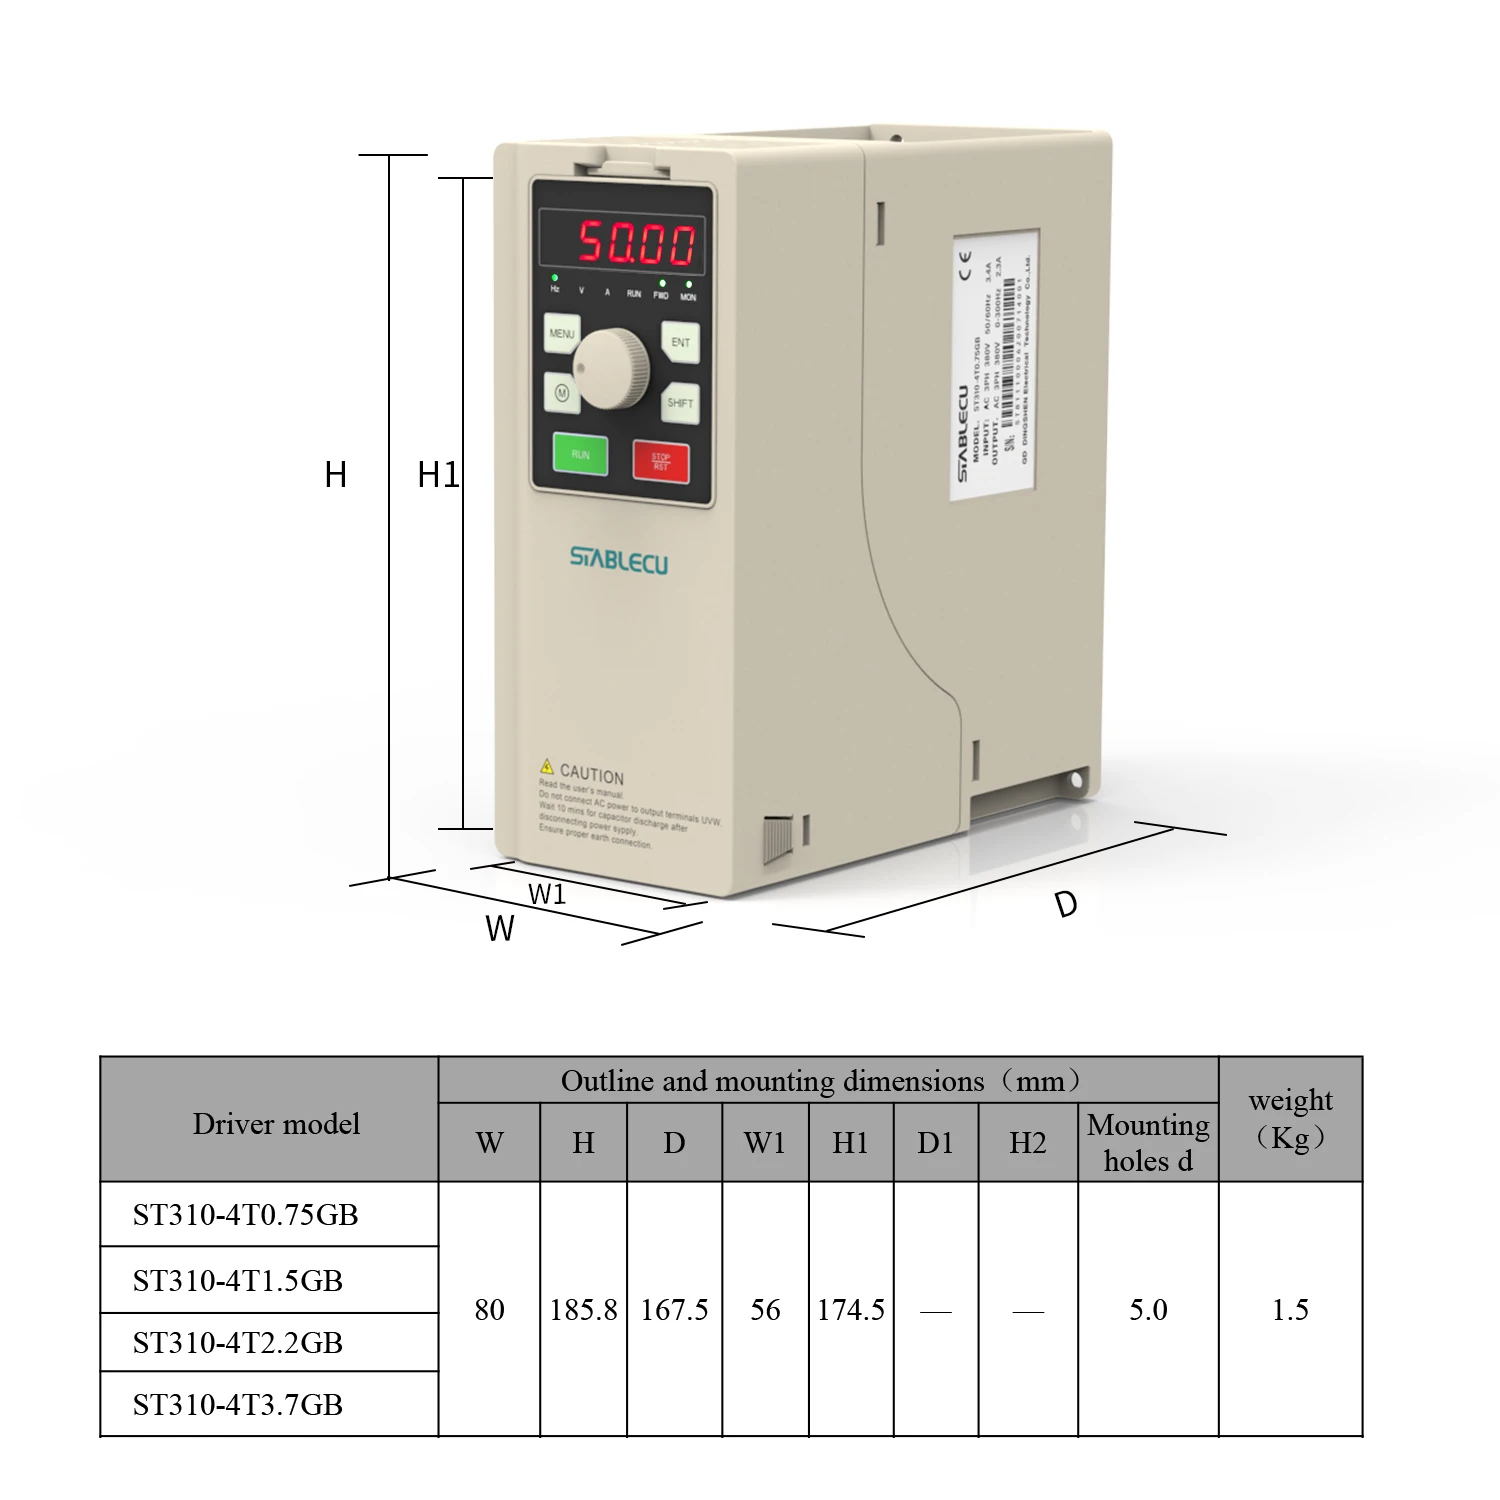 

AC driver 50hz to 60 hybrid solar inverter single phase to 3 phase 220v to 220v 40kw 15kw 0.75kw variable frequency converter